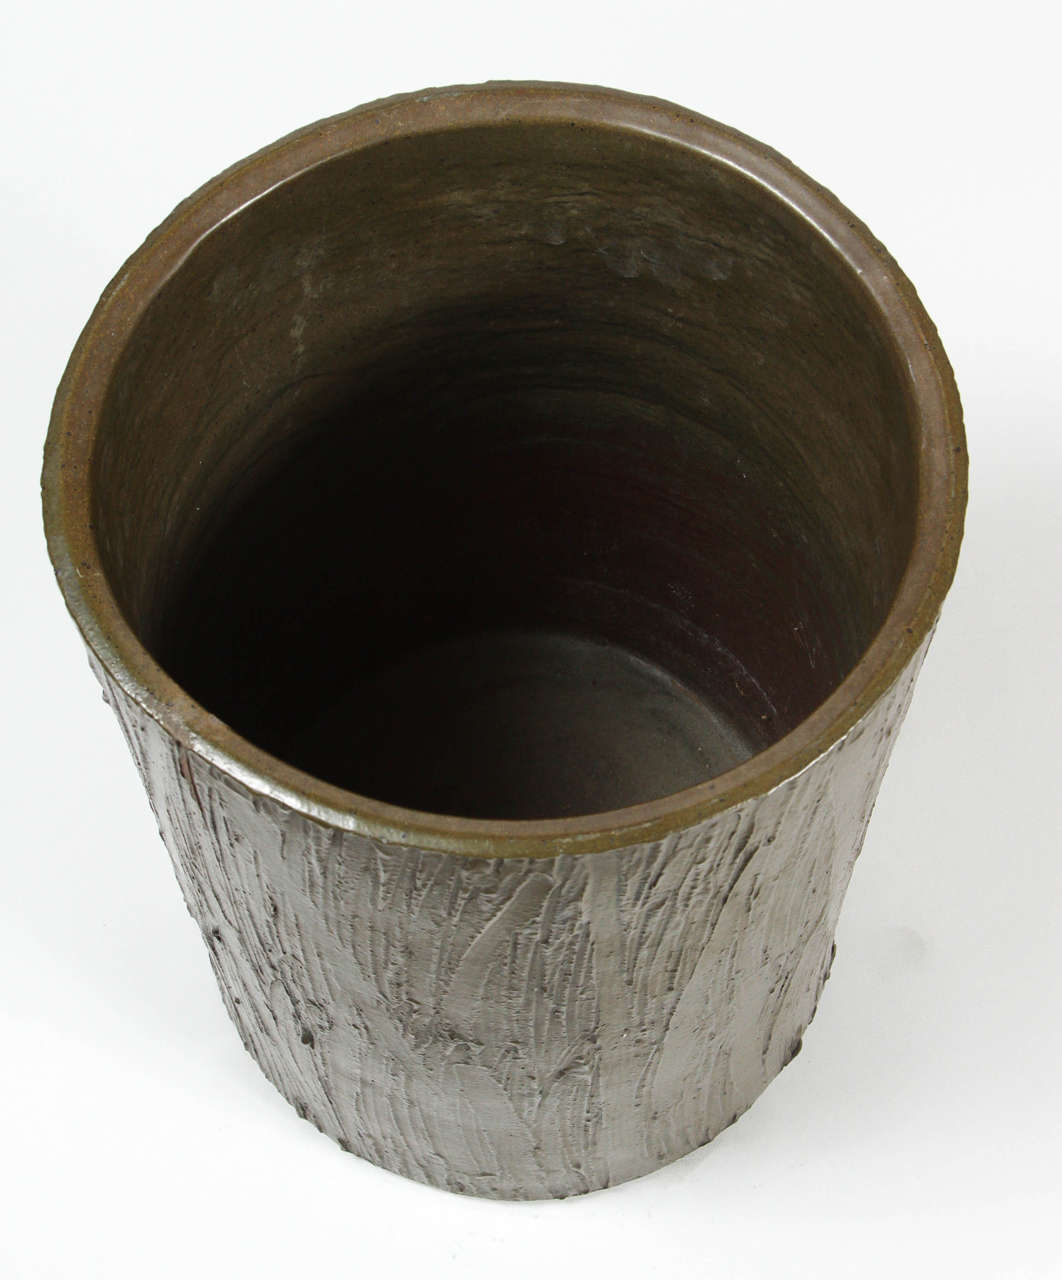 Stoneware David Cressey for AP # 4030 Olive Glazed Planter with Linear Texture